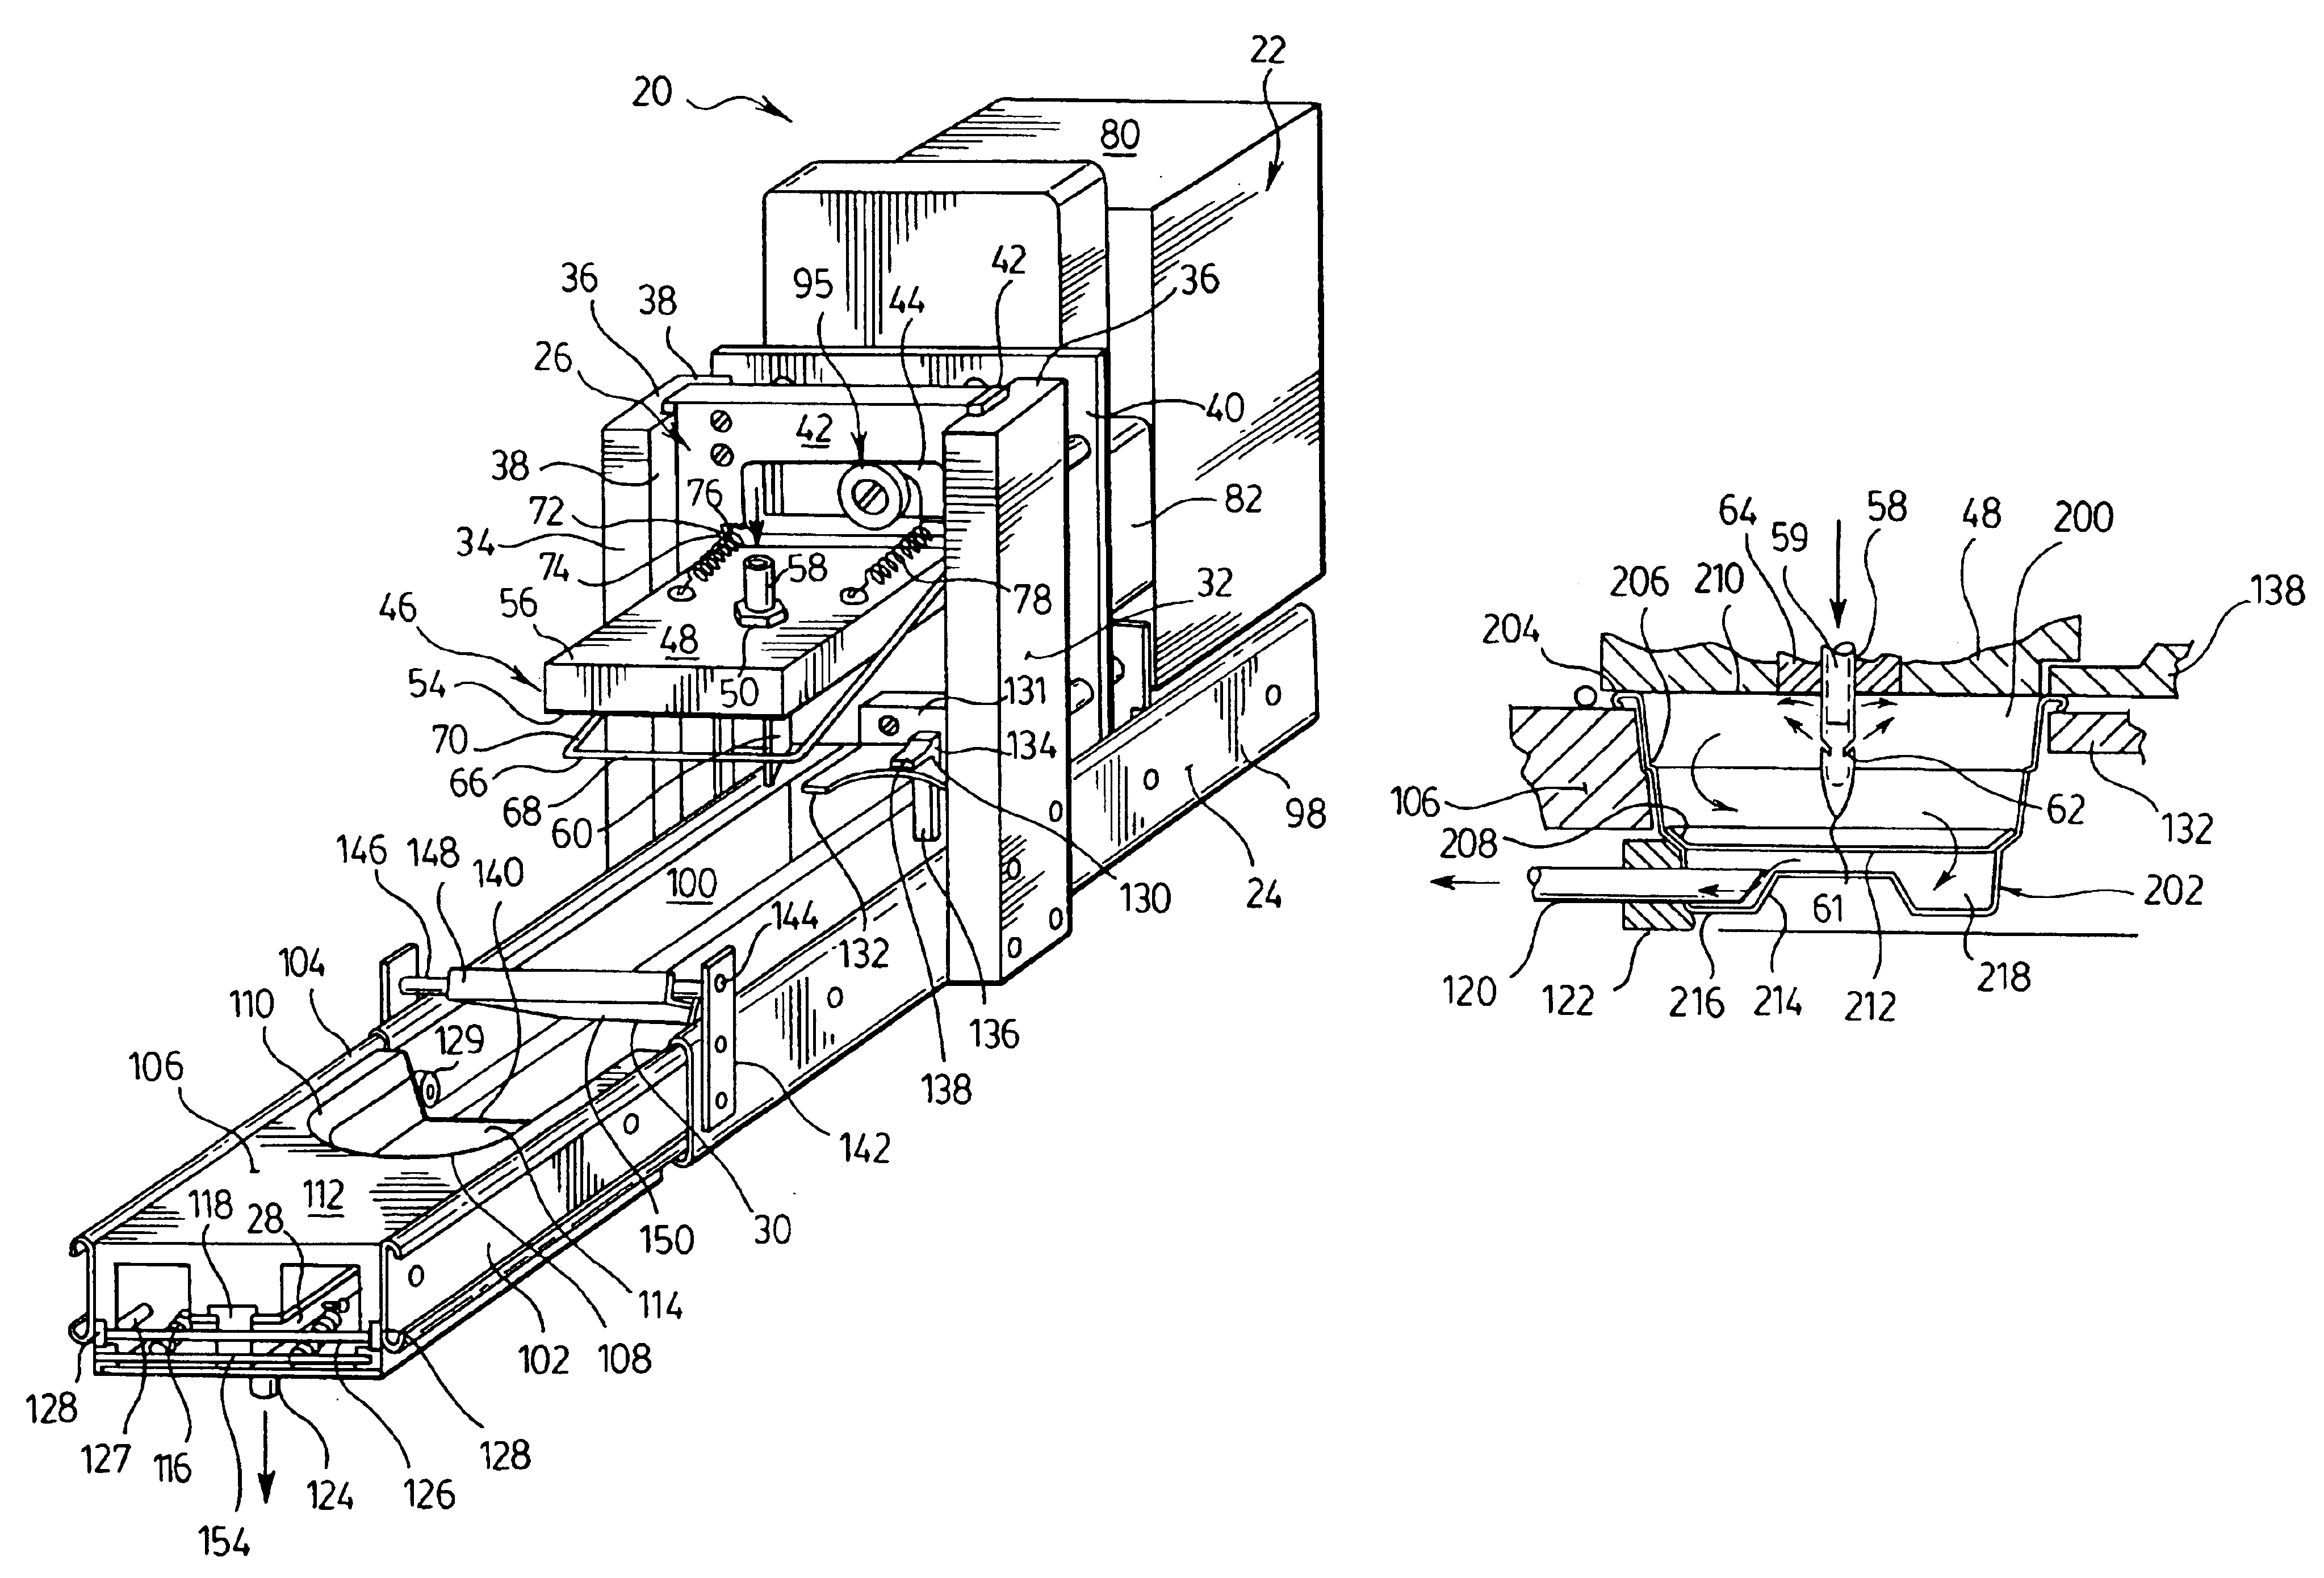 Beverage dispensing machine including cartridge ejector assembly